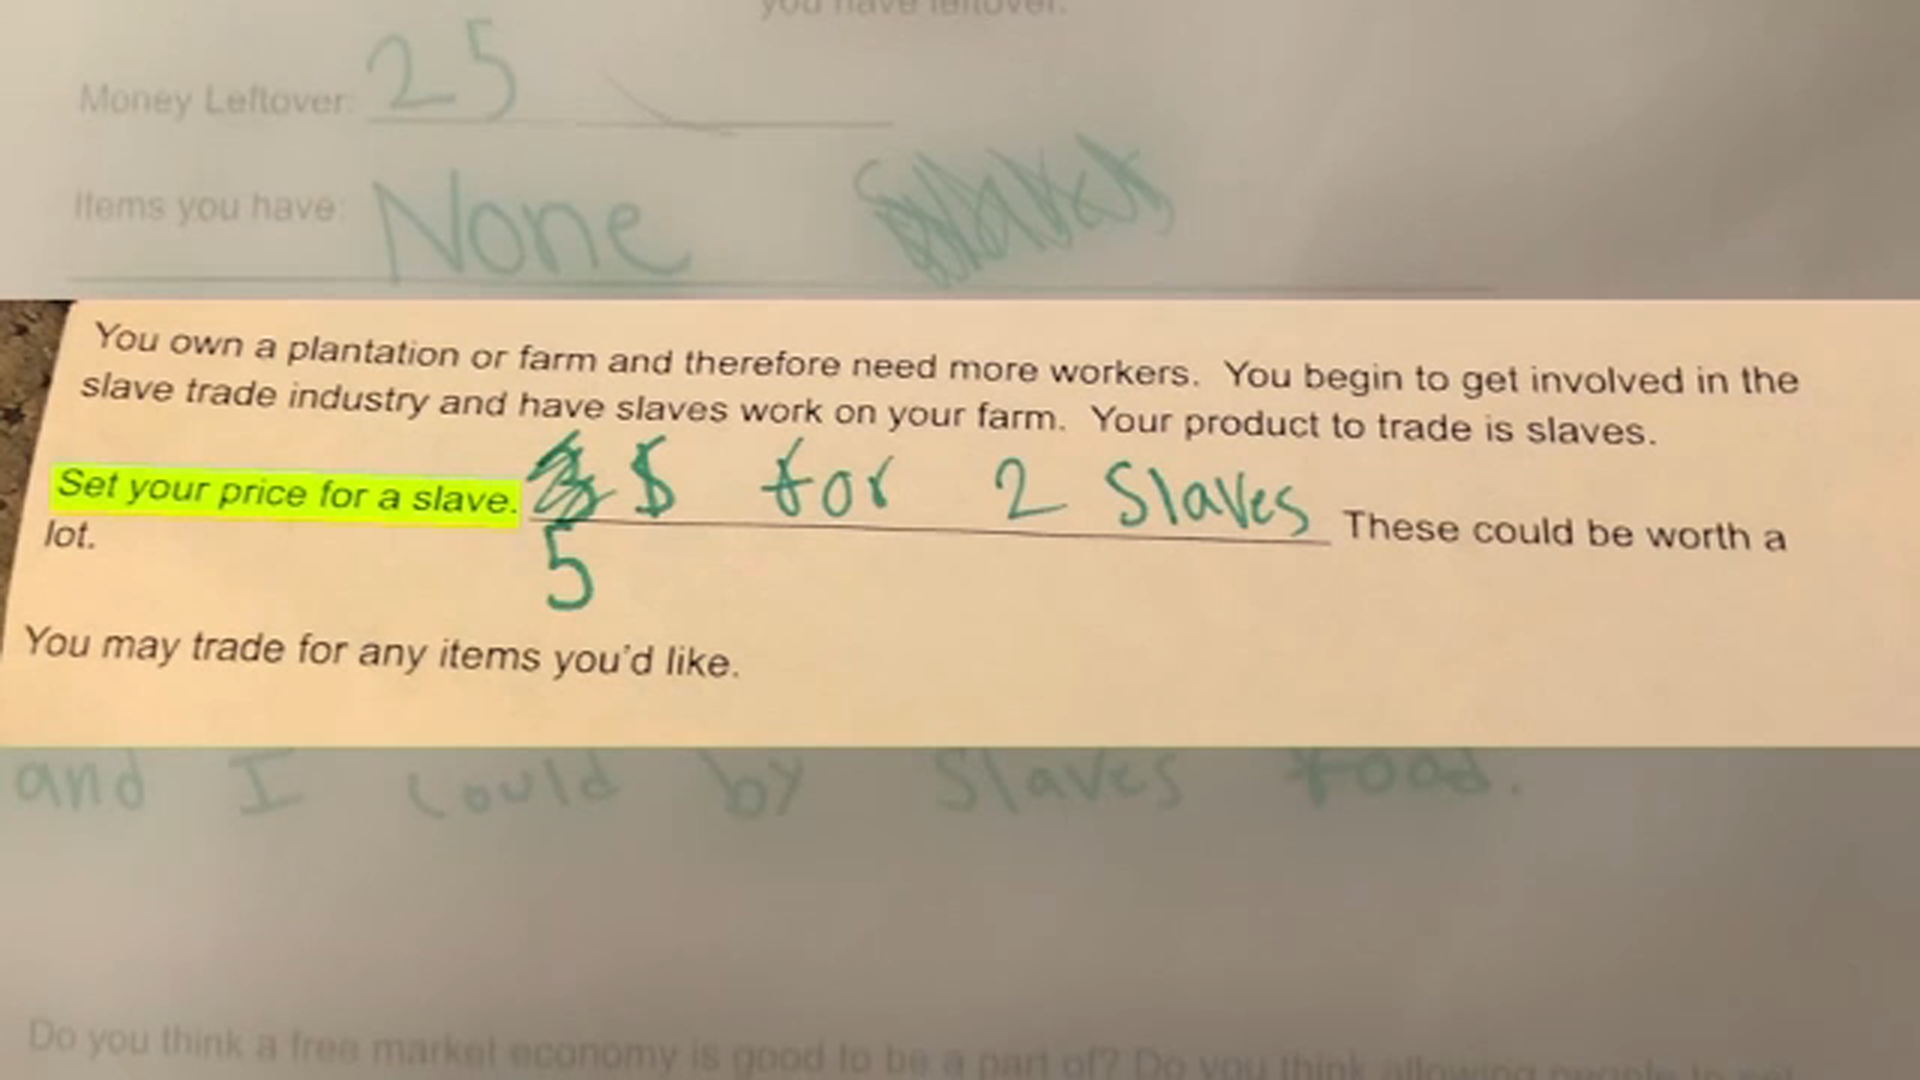 Elementary school assignment asks students to ‘set your price for a slave’